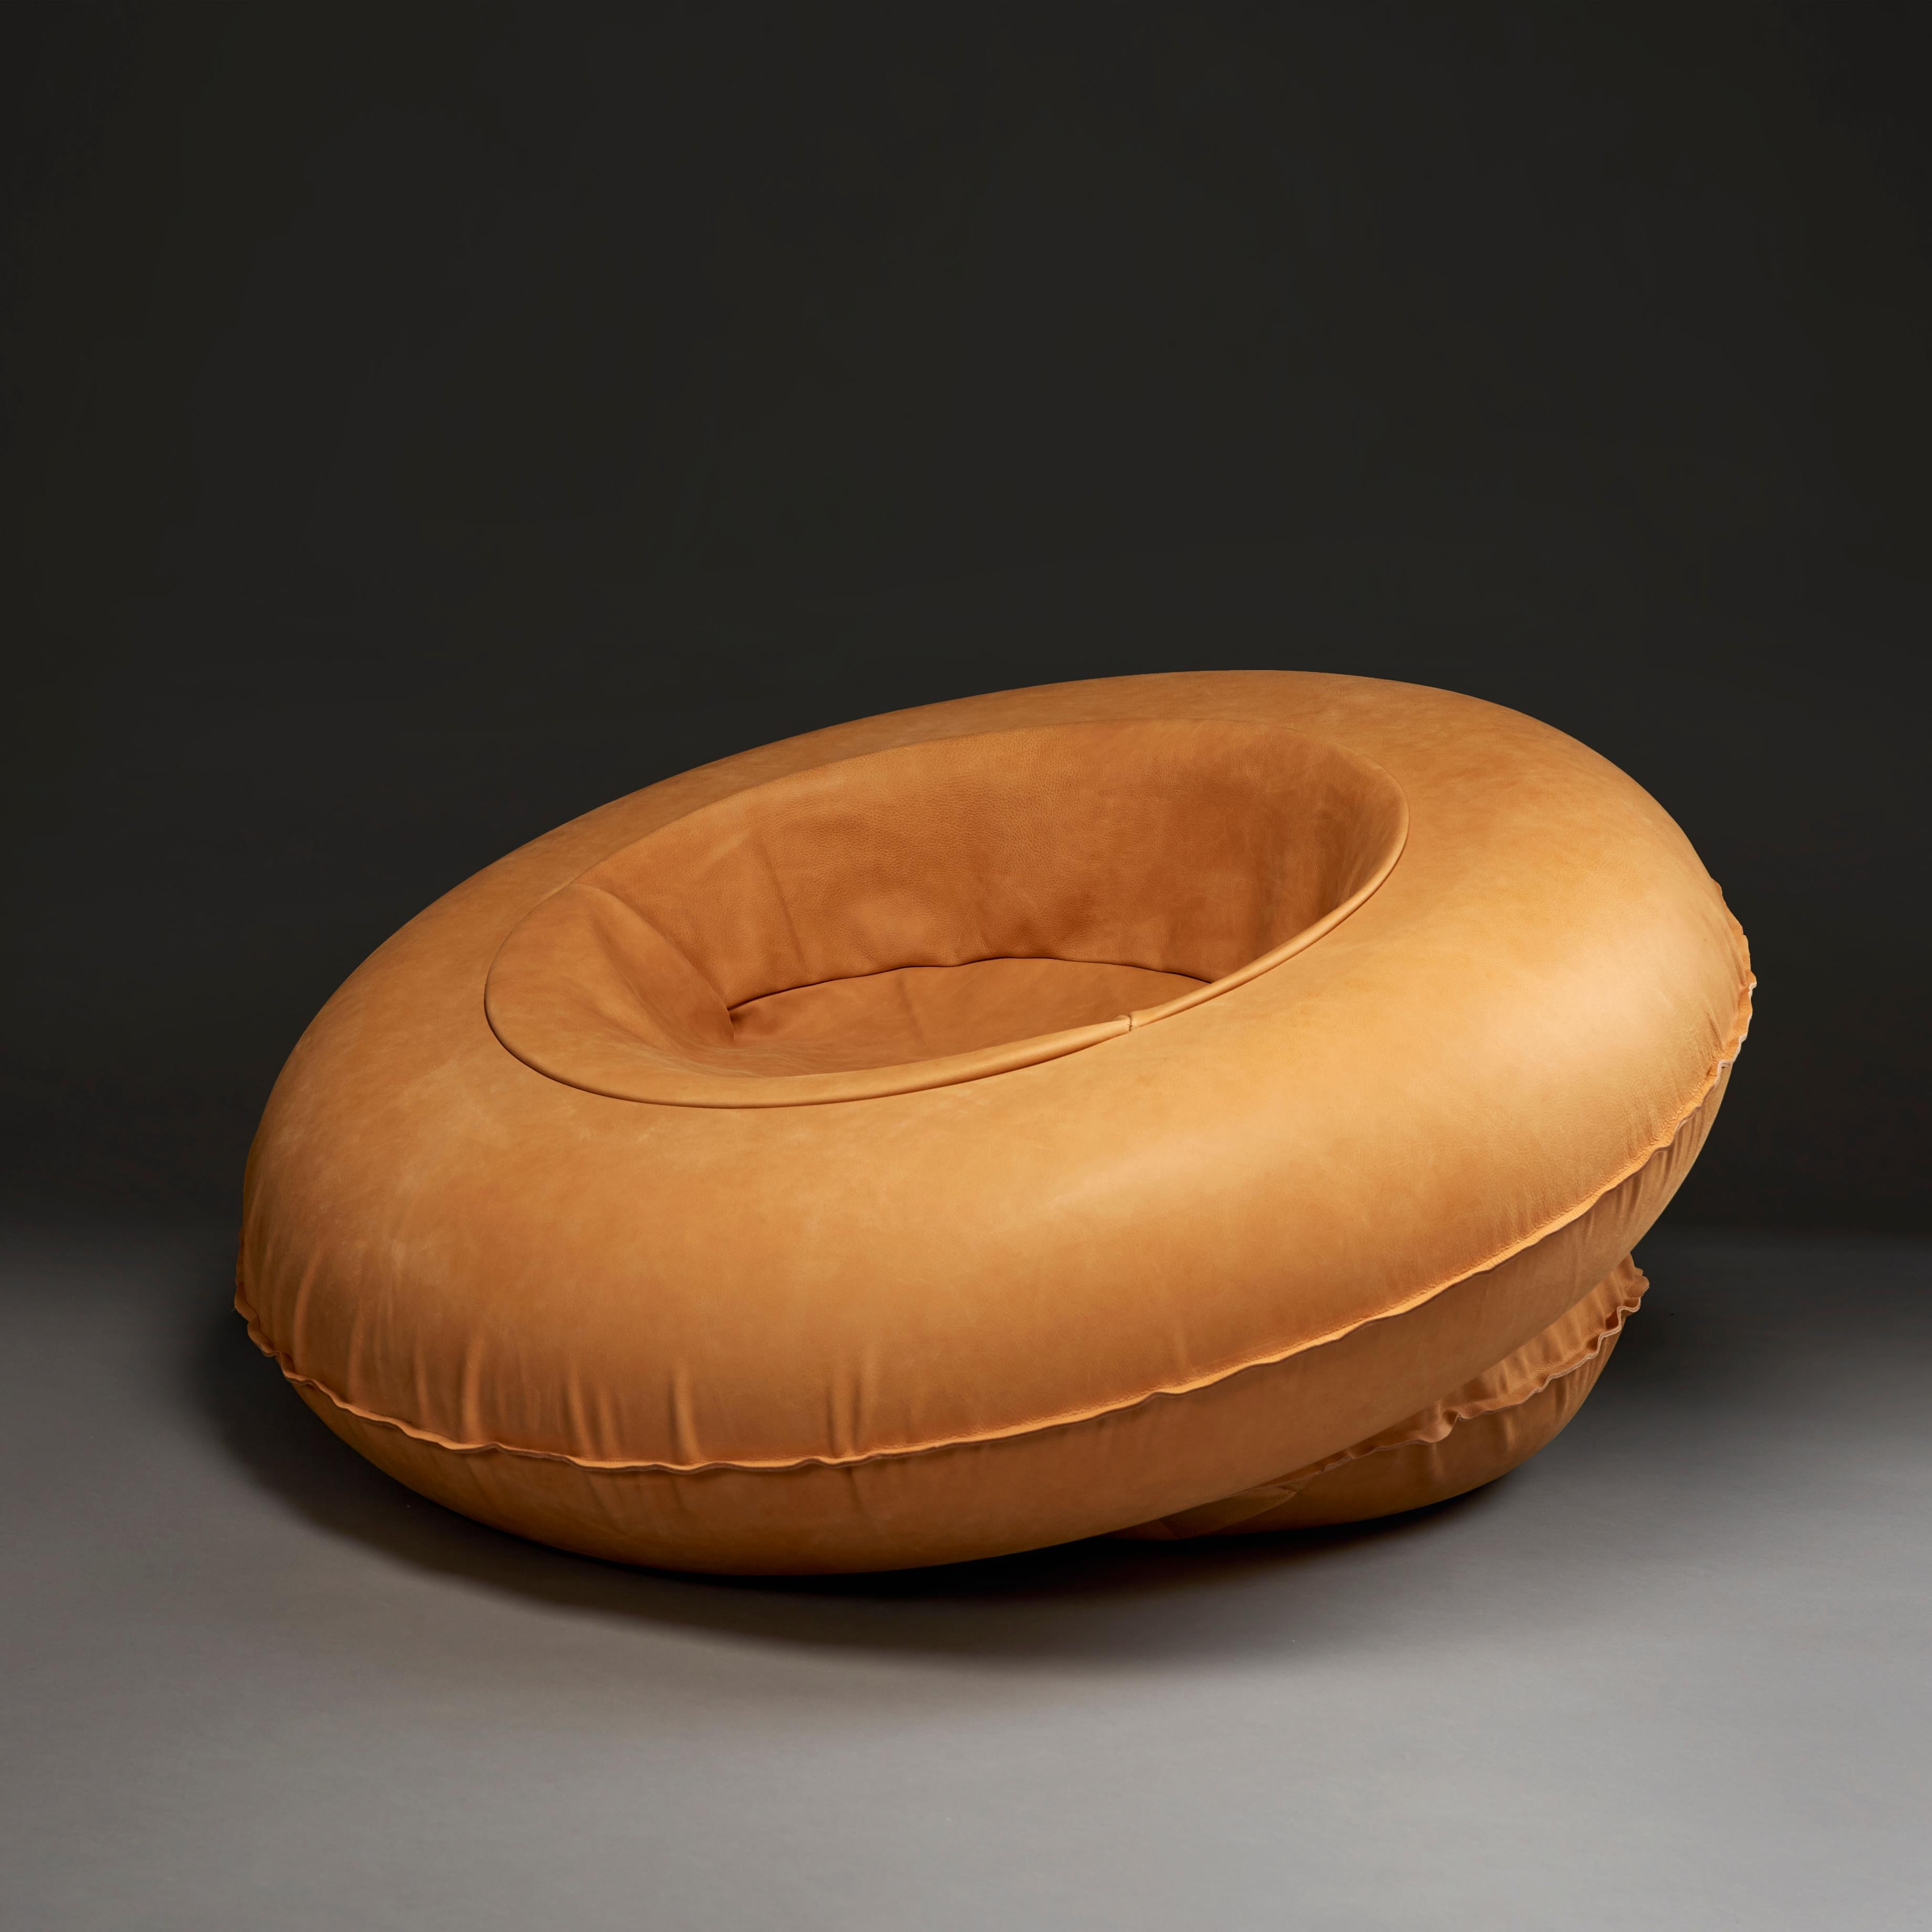 The advantage of inflatable products is that they are light and portable. We usually tend to buy inflatable furniture products for temporary use and is often seen as a quick fix for less ordinary situations. However, they usually don't stay in space